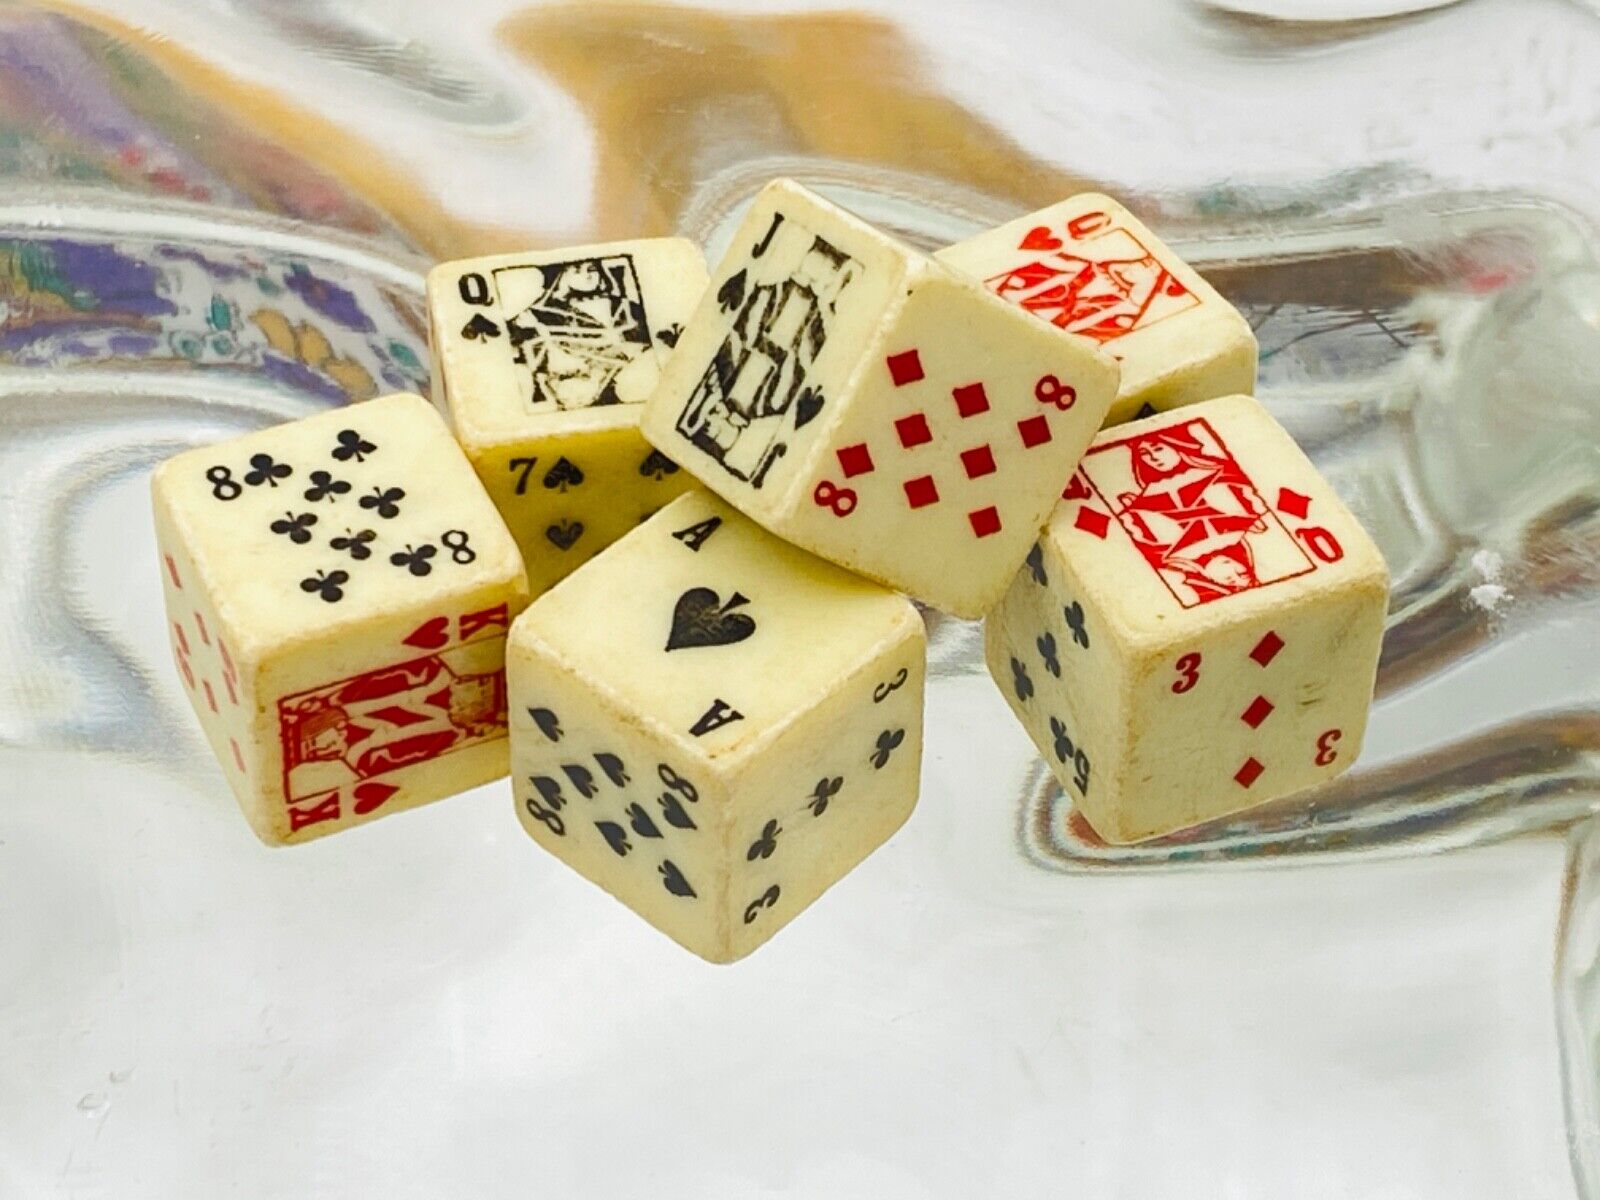 Lot of 6 Vintage Poker Dice - Game Replacement Dice